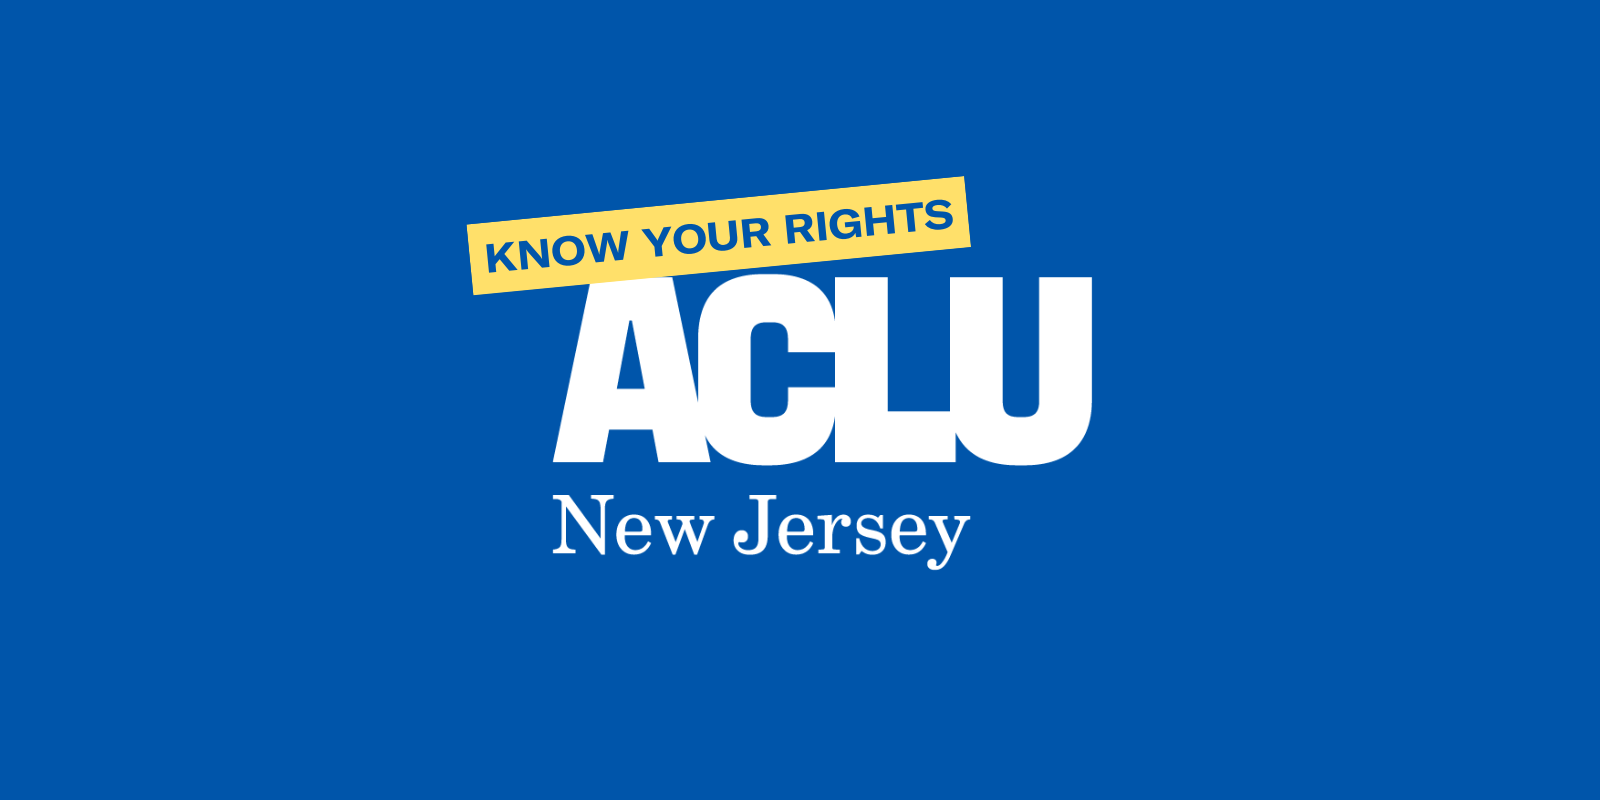 ACLU-NJ logo with a banner at the top reading "Know Your Rights" against a blue background